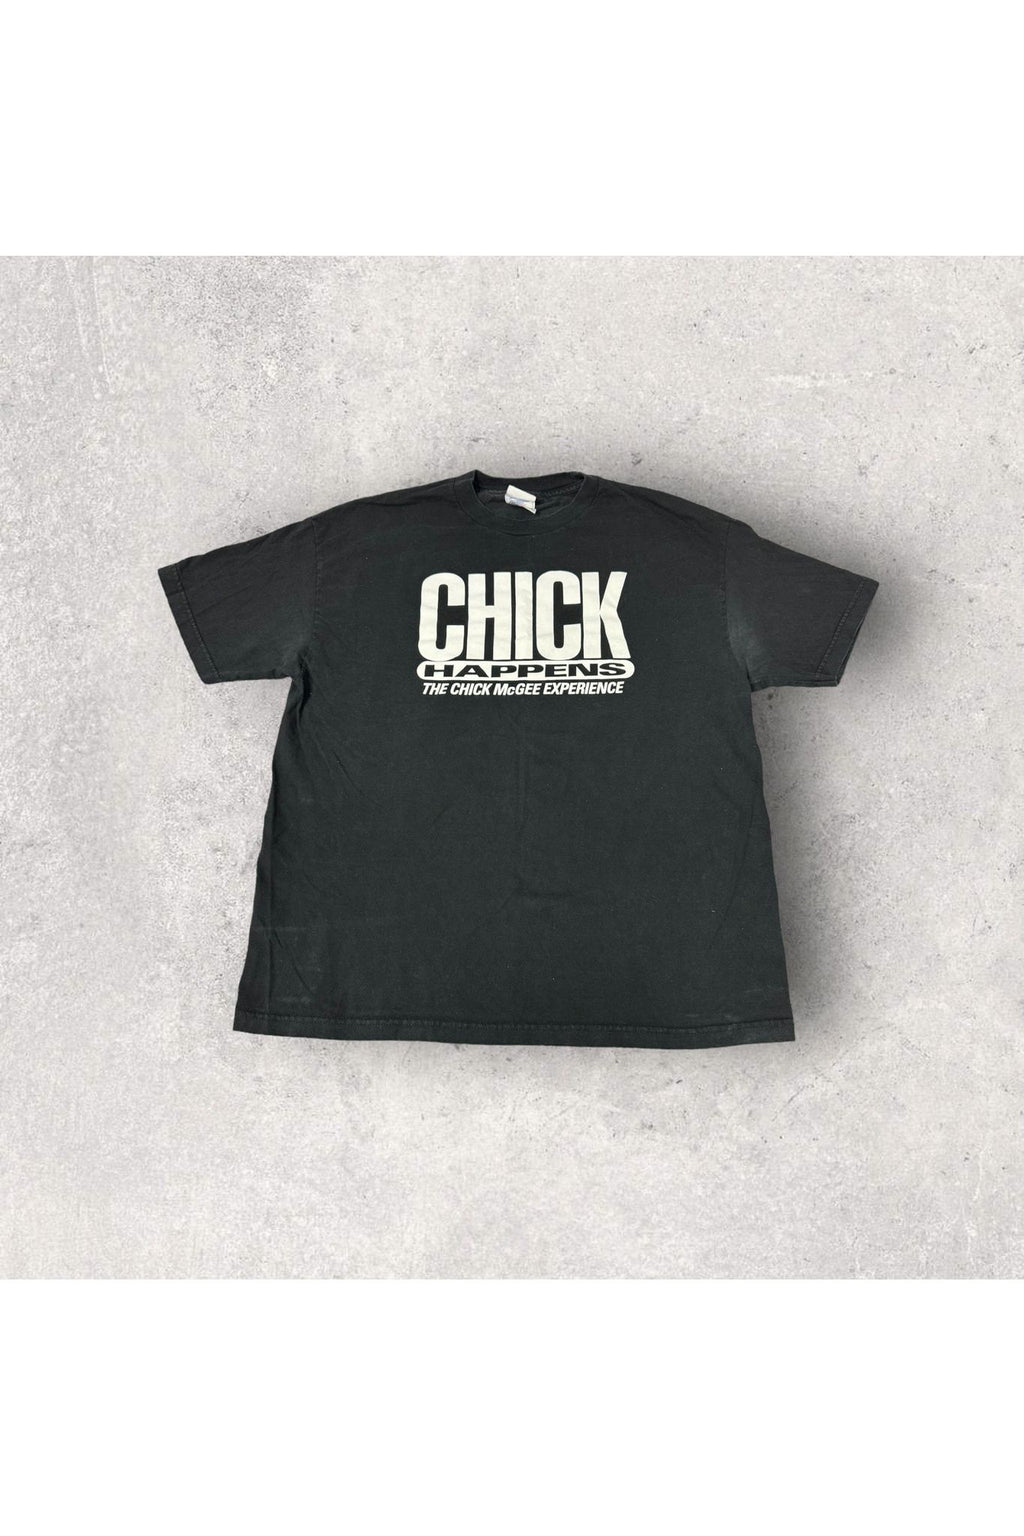 Vintage Murina Chick Happens The Chuck McGee Experience Tee- XL